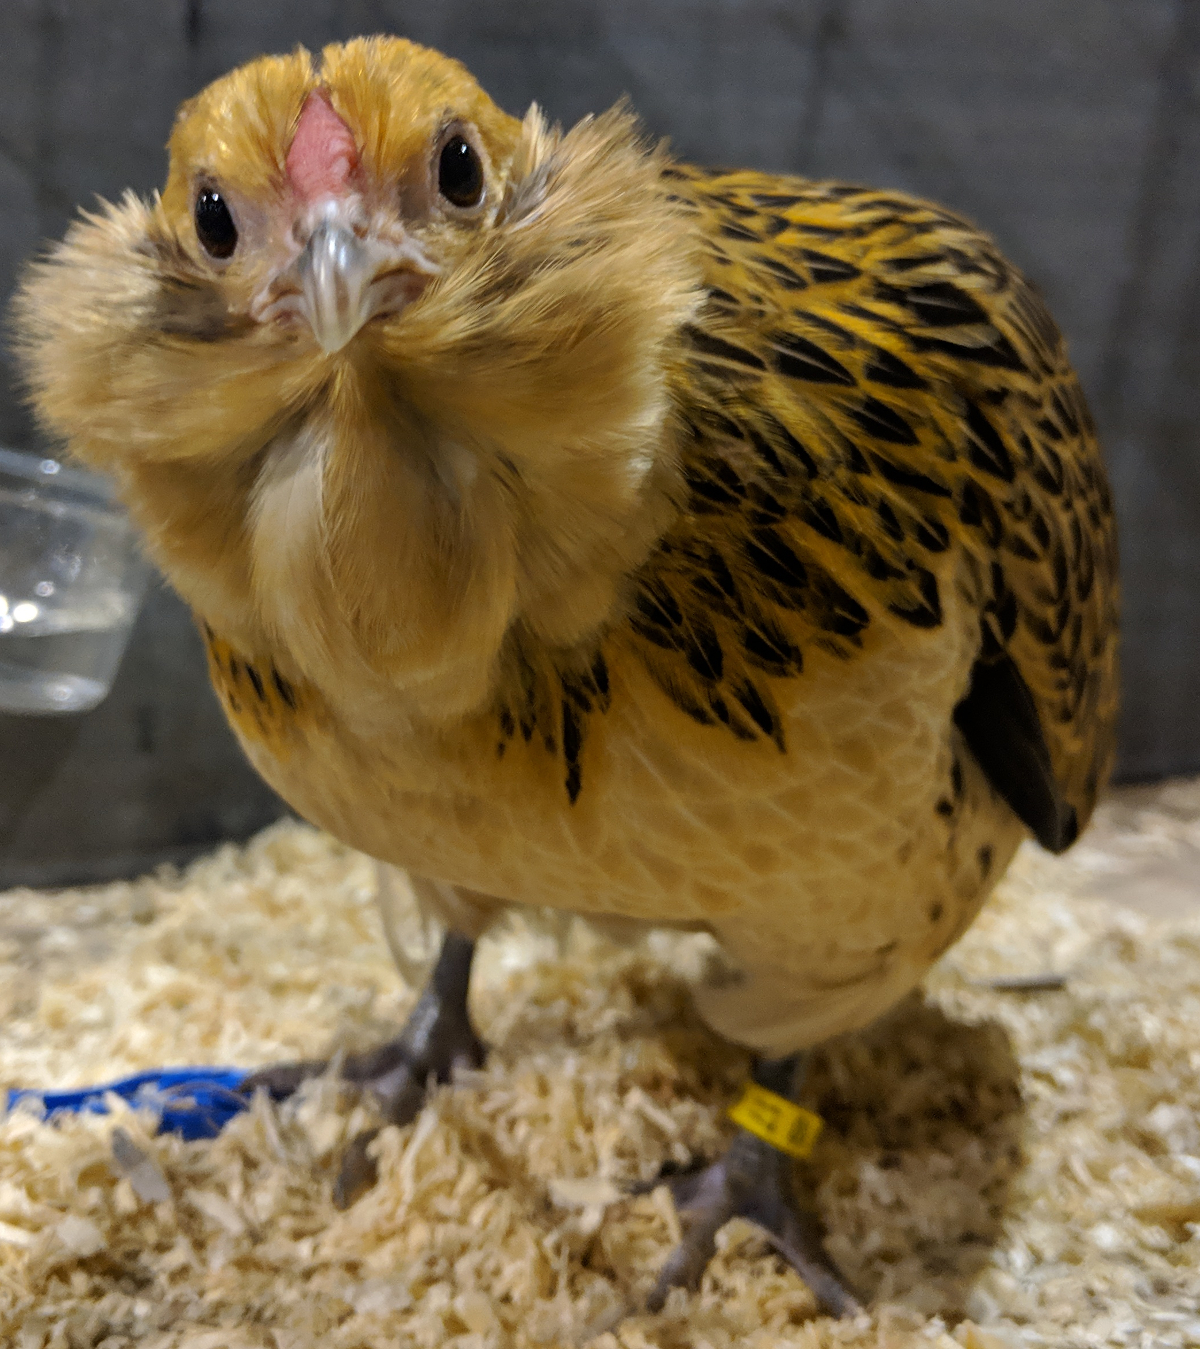 Bantam chickens are a lot smaller and quieter than large fowl.